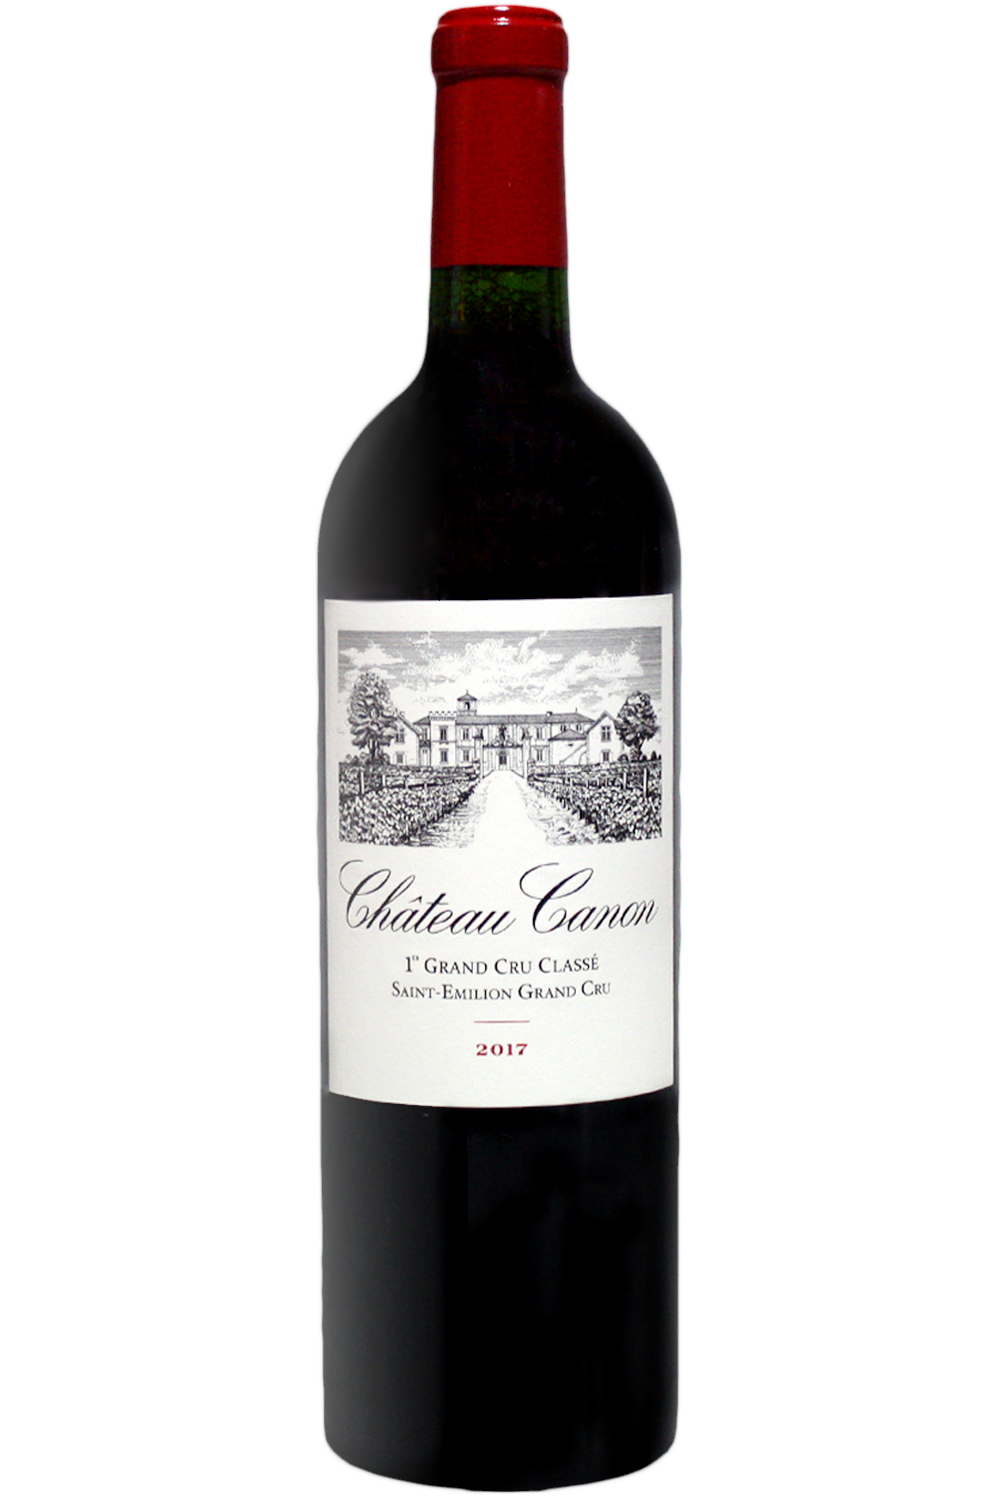 WineVins Chateau Canon 2017